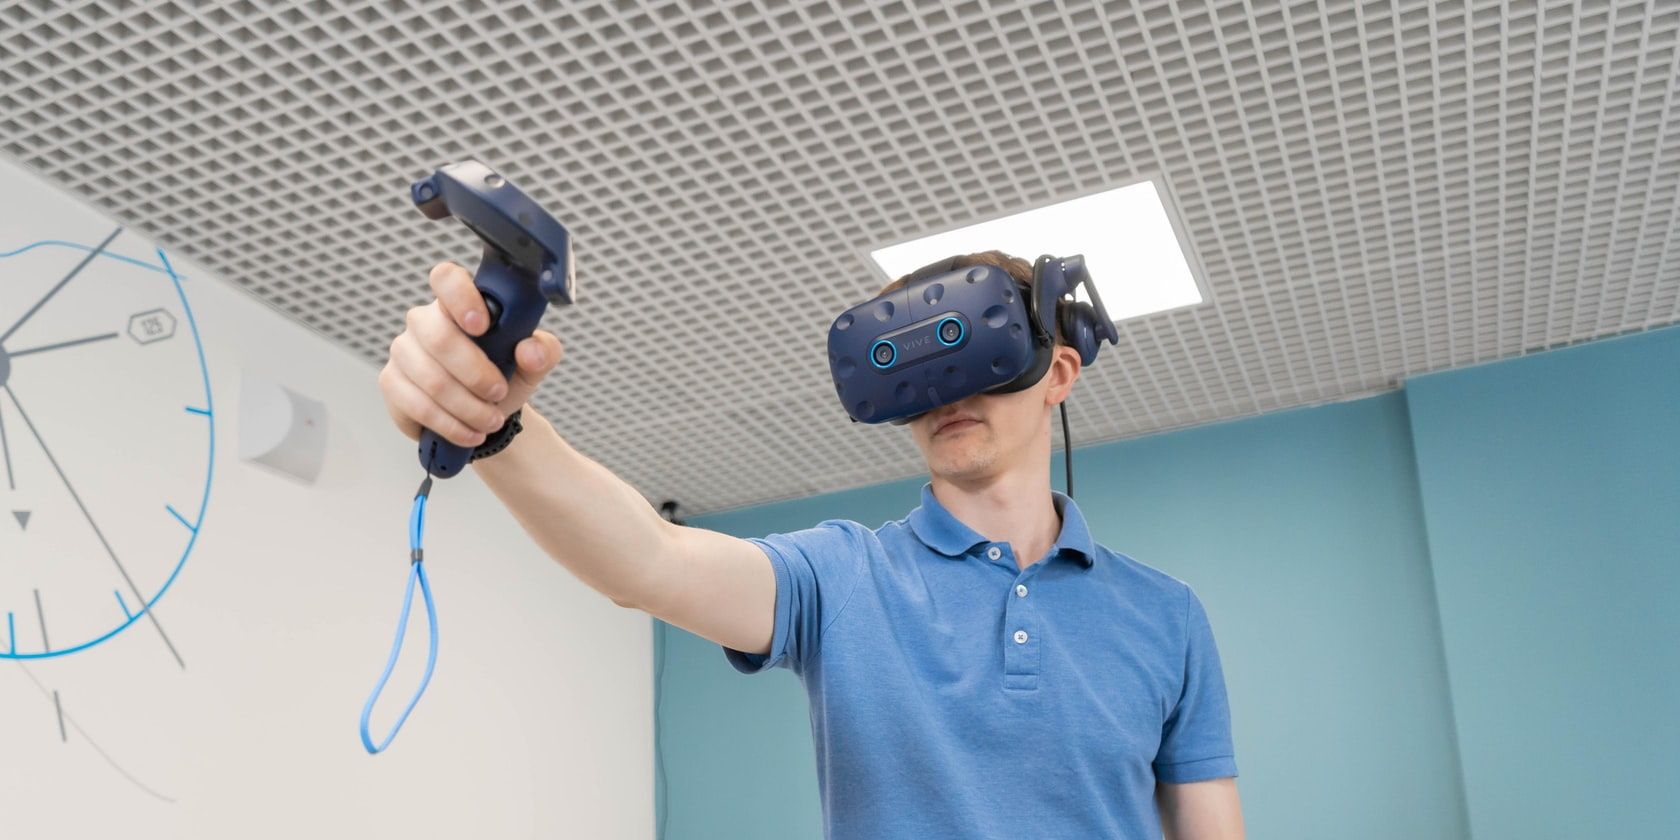 person using a live vr headset